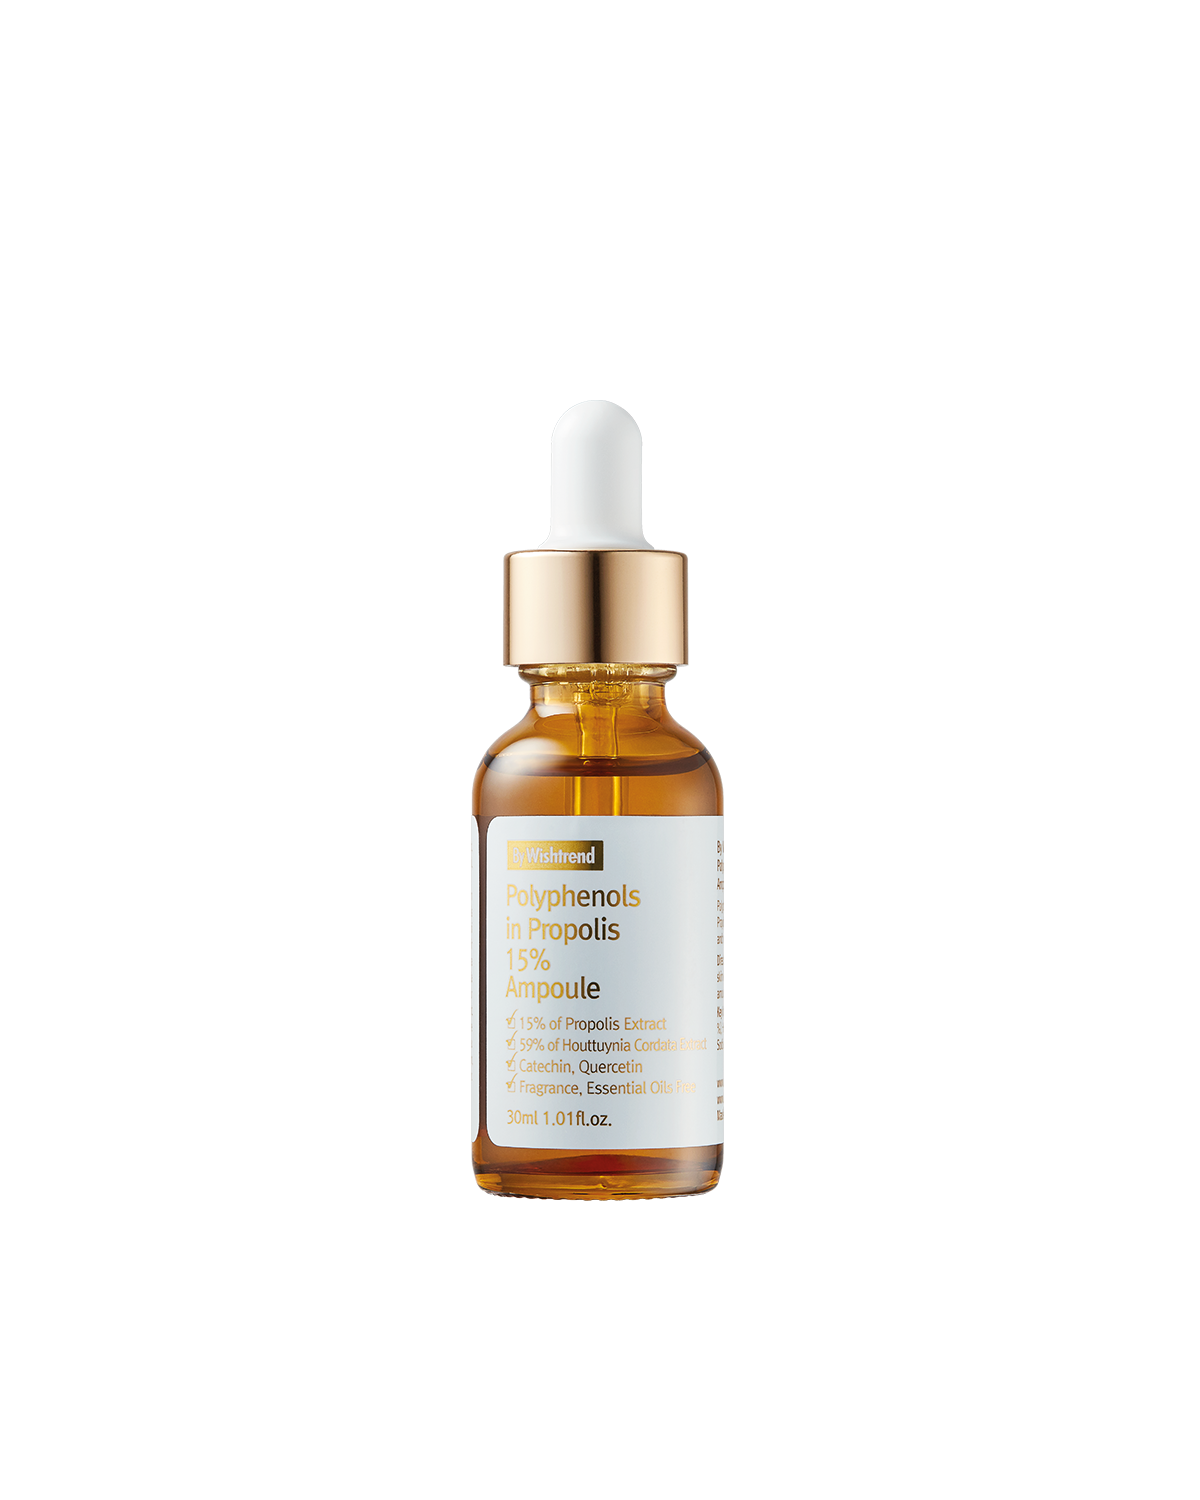 BY WISHTREND Polyphenols in Propolis 15% Ampoule 30 ml